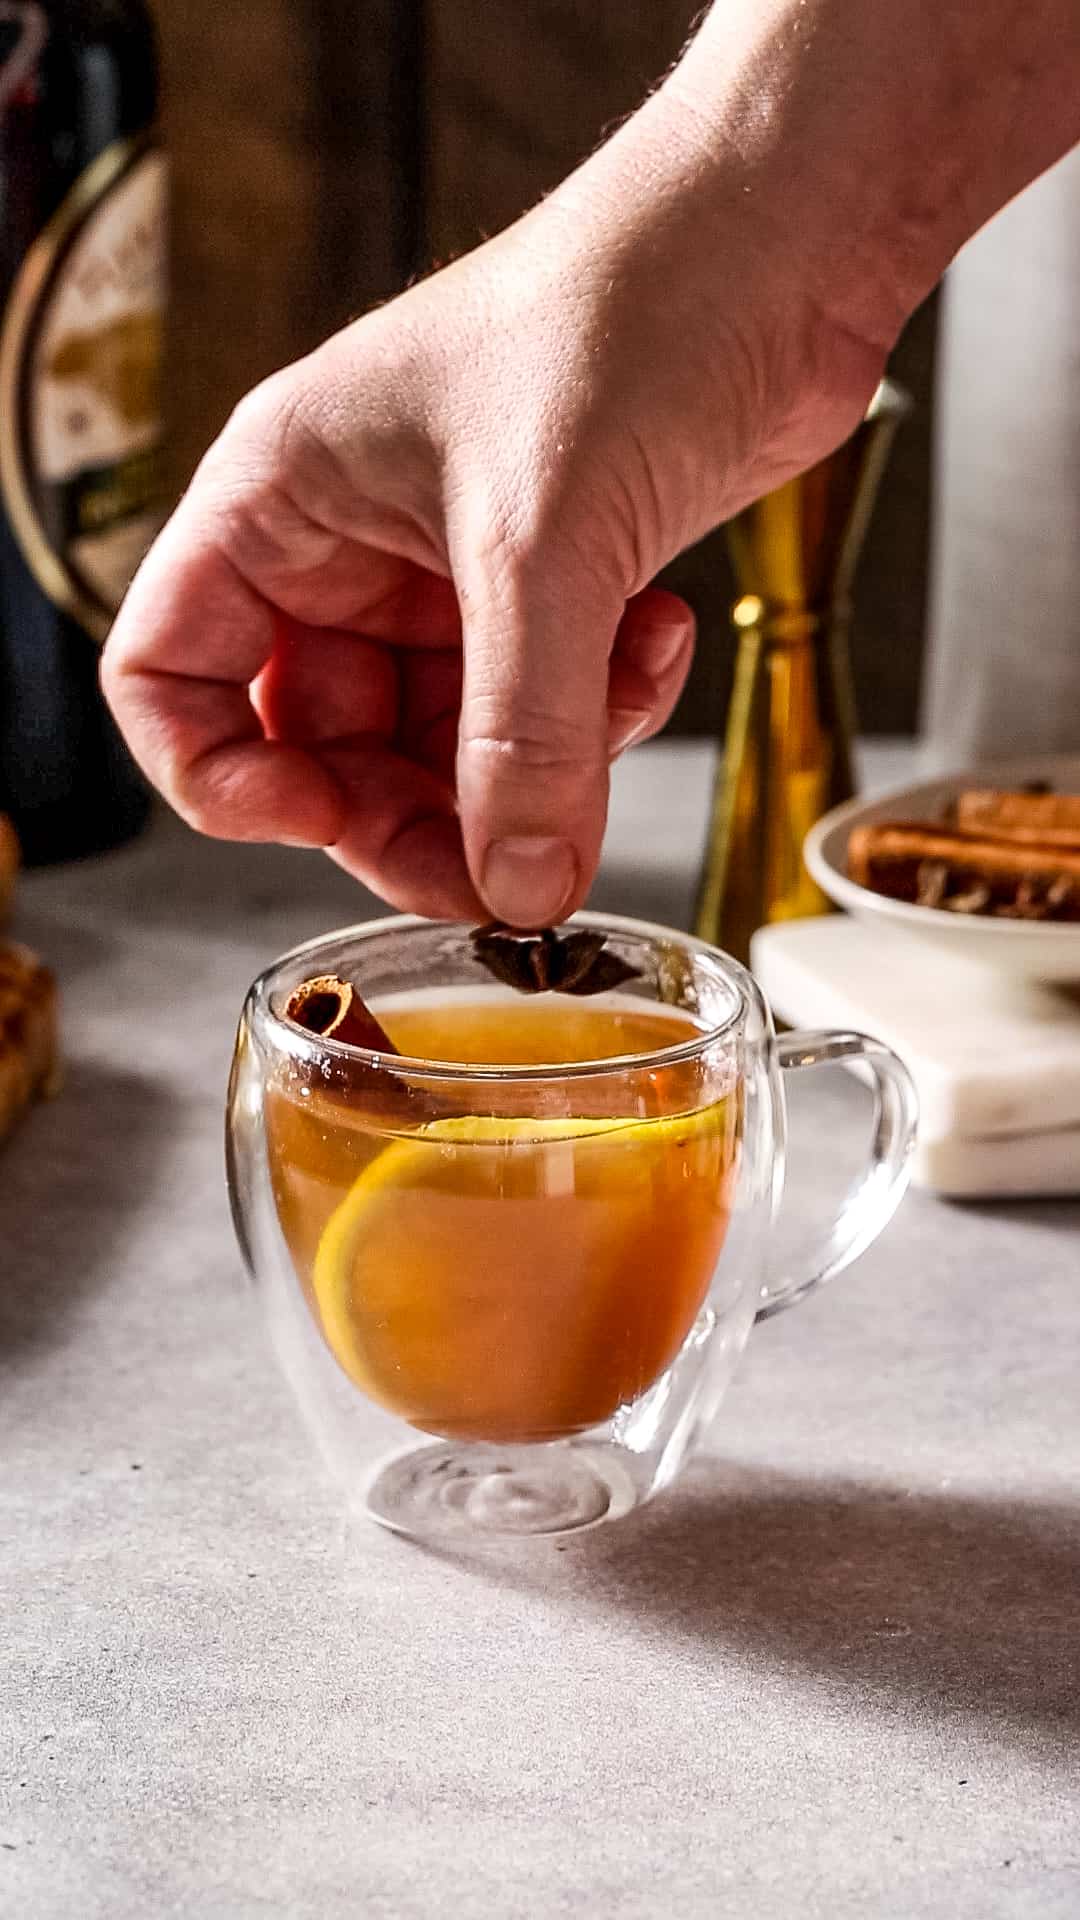 Hand adding a star anise to a glass mug filled with amber liquid, a cinnamon stick and a lemon slice.